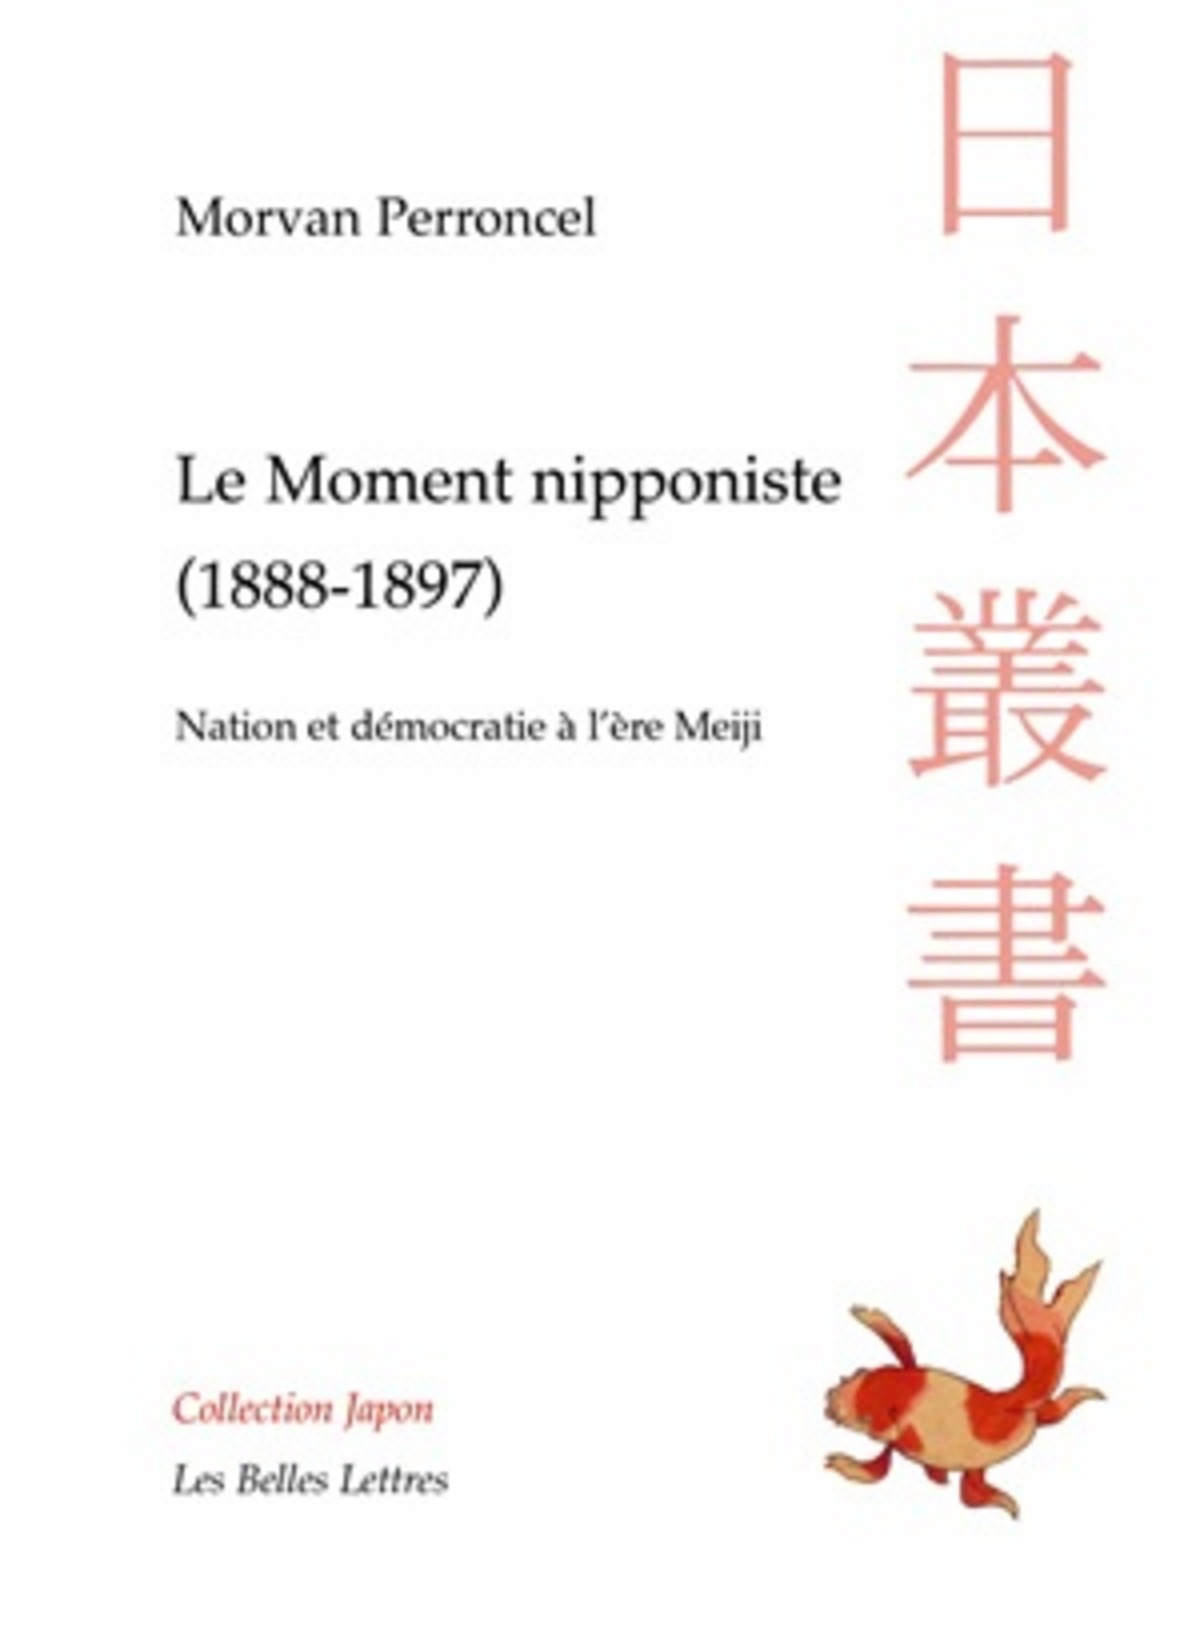 Le Moment nipponiste (1888-1897)